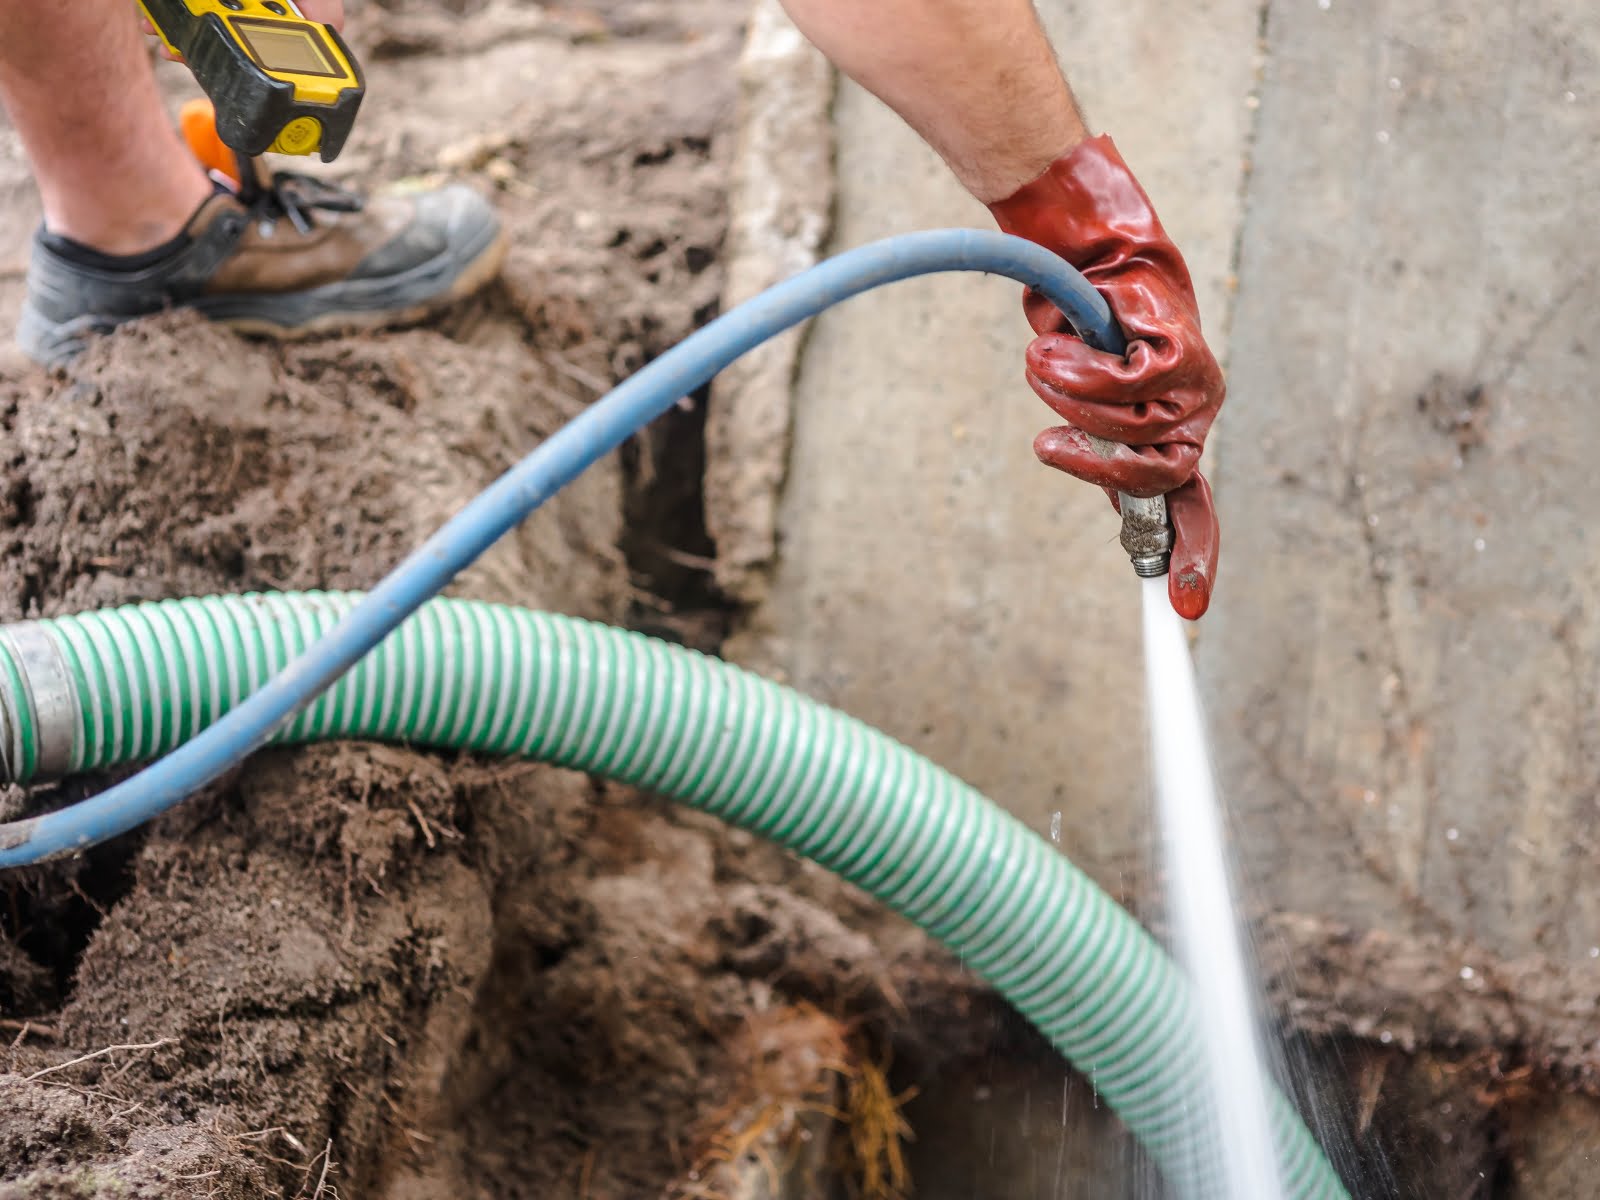 A man performing septic tank maintenance, using a hose to clean a hole in the ground.